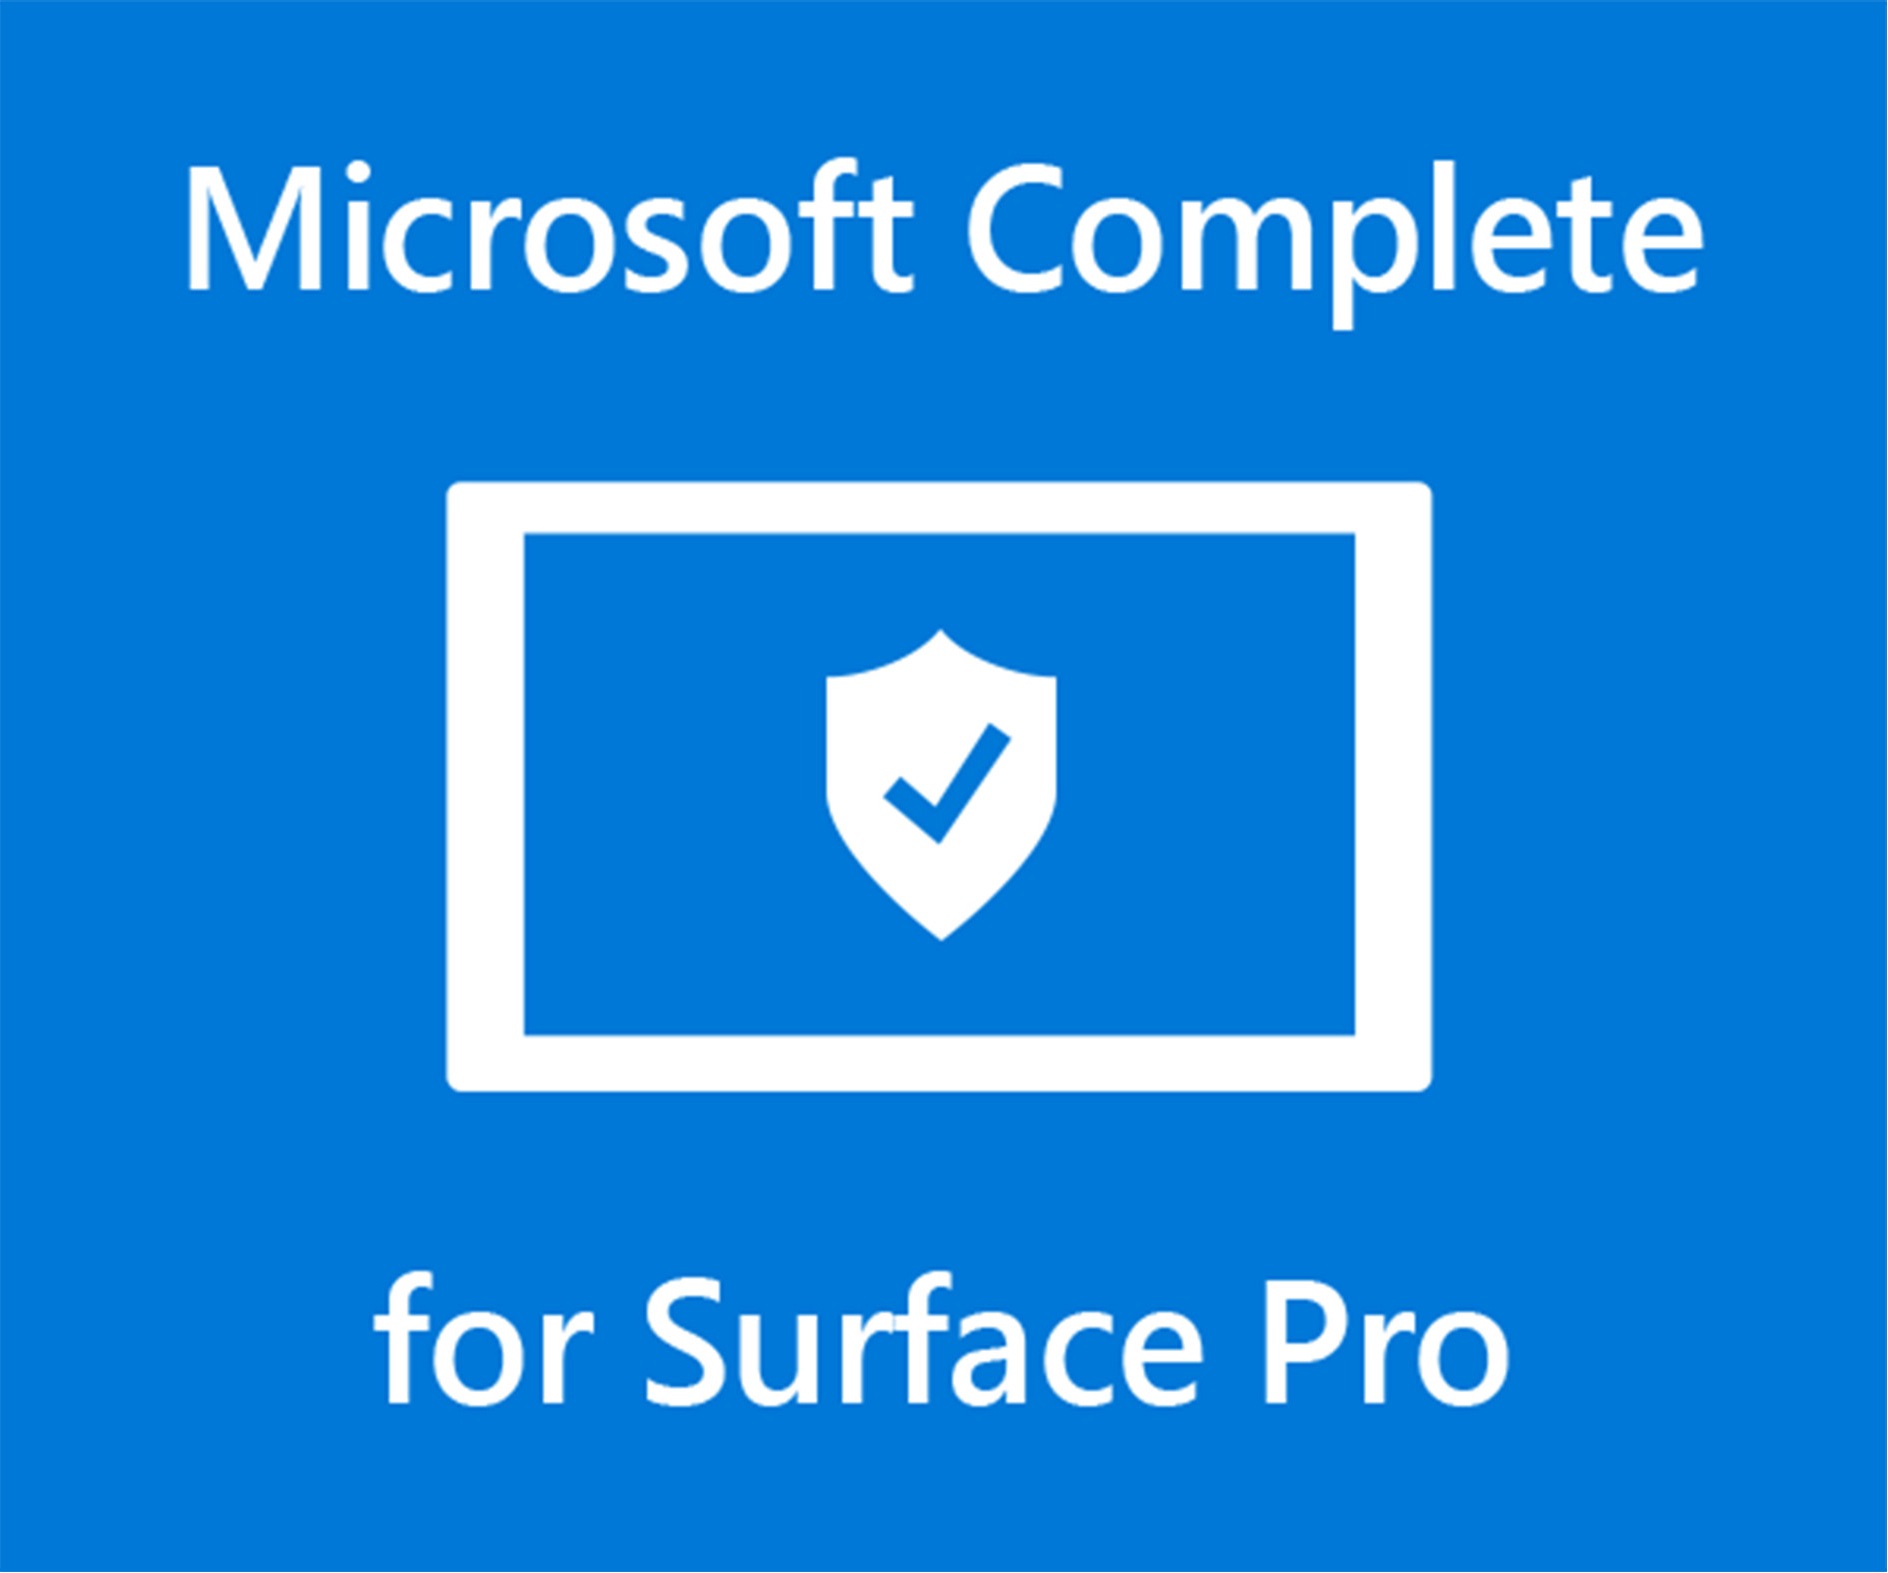 Microsoft Complete for Surface Pro